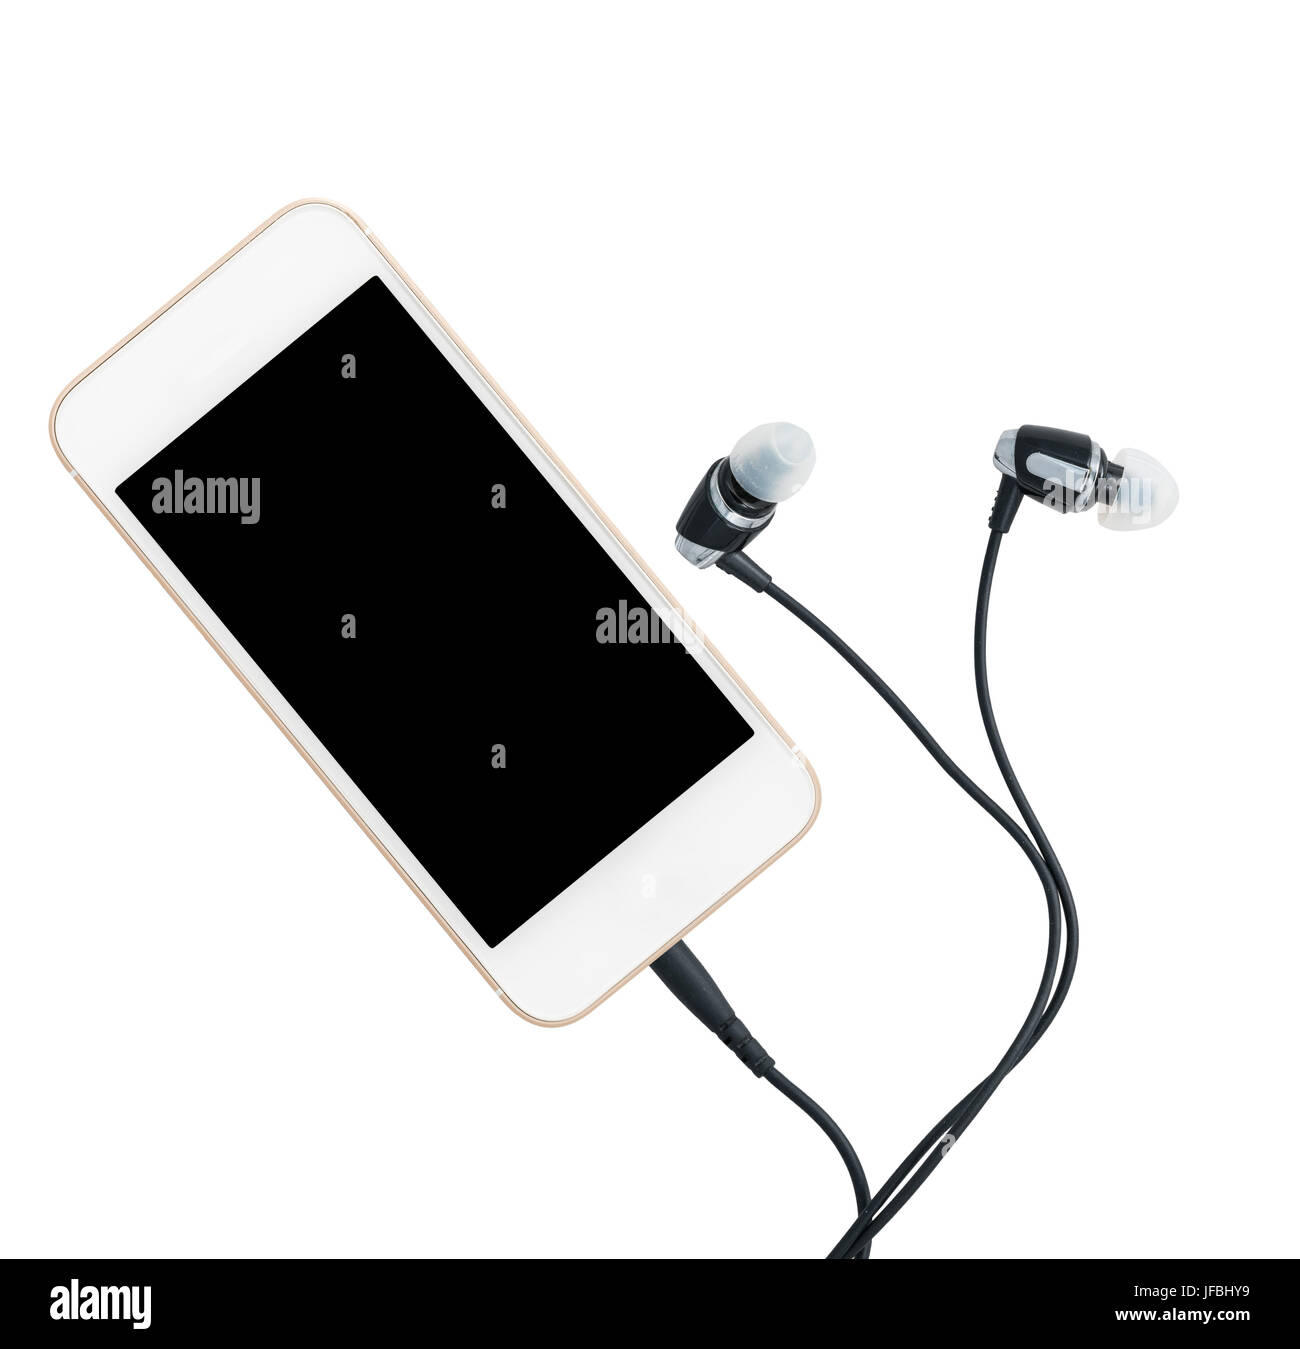 Smartphone music player and earbuds Stock Photo